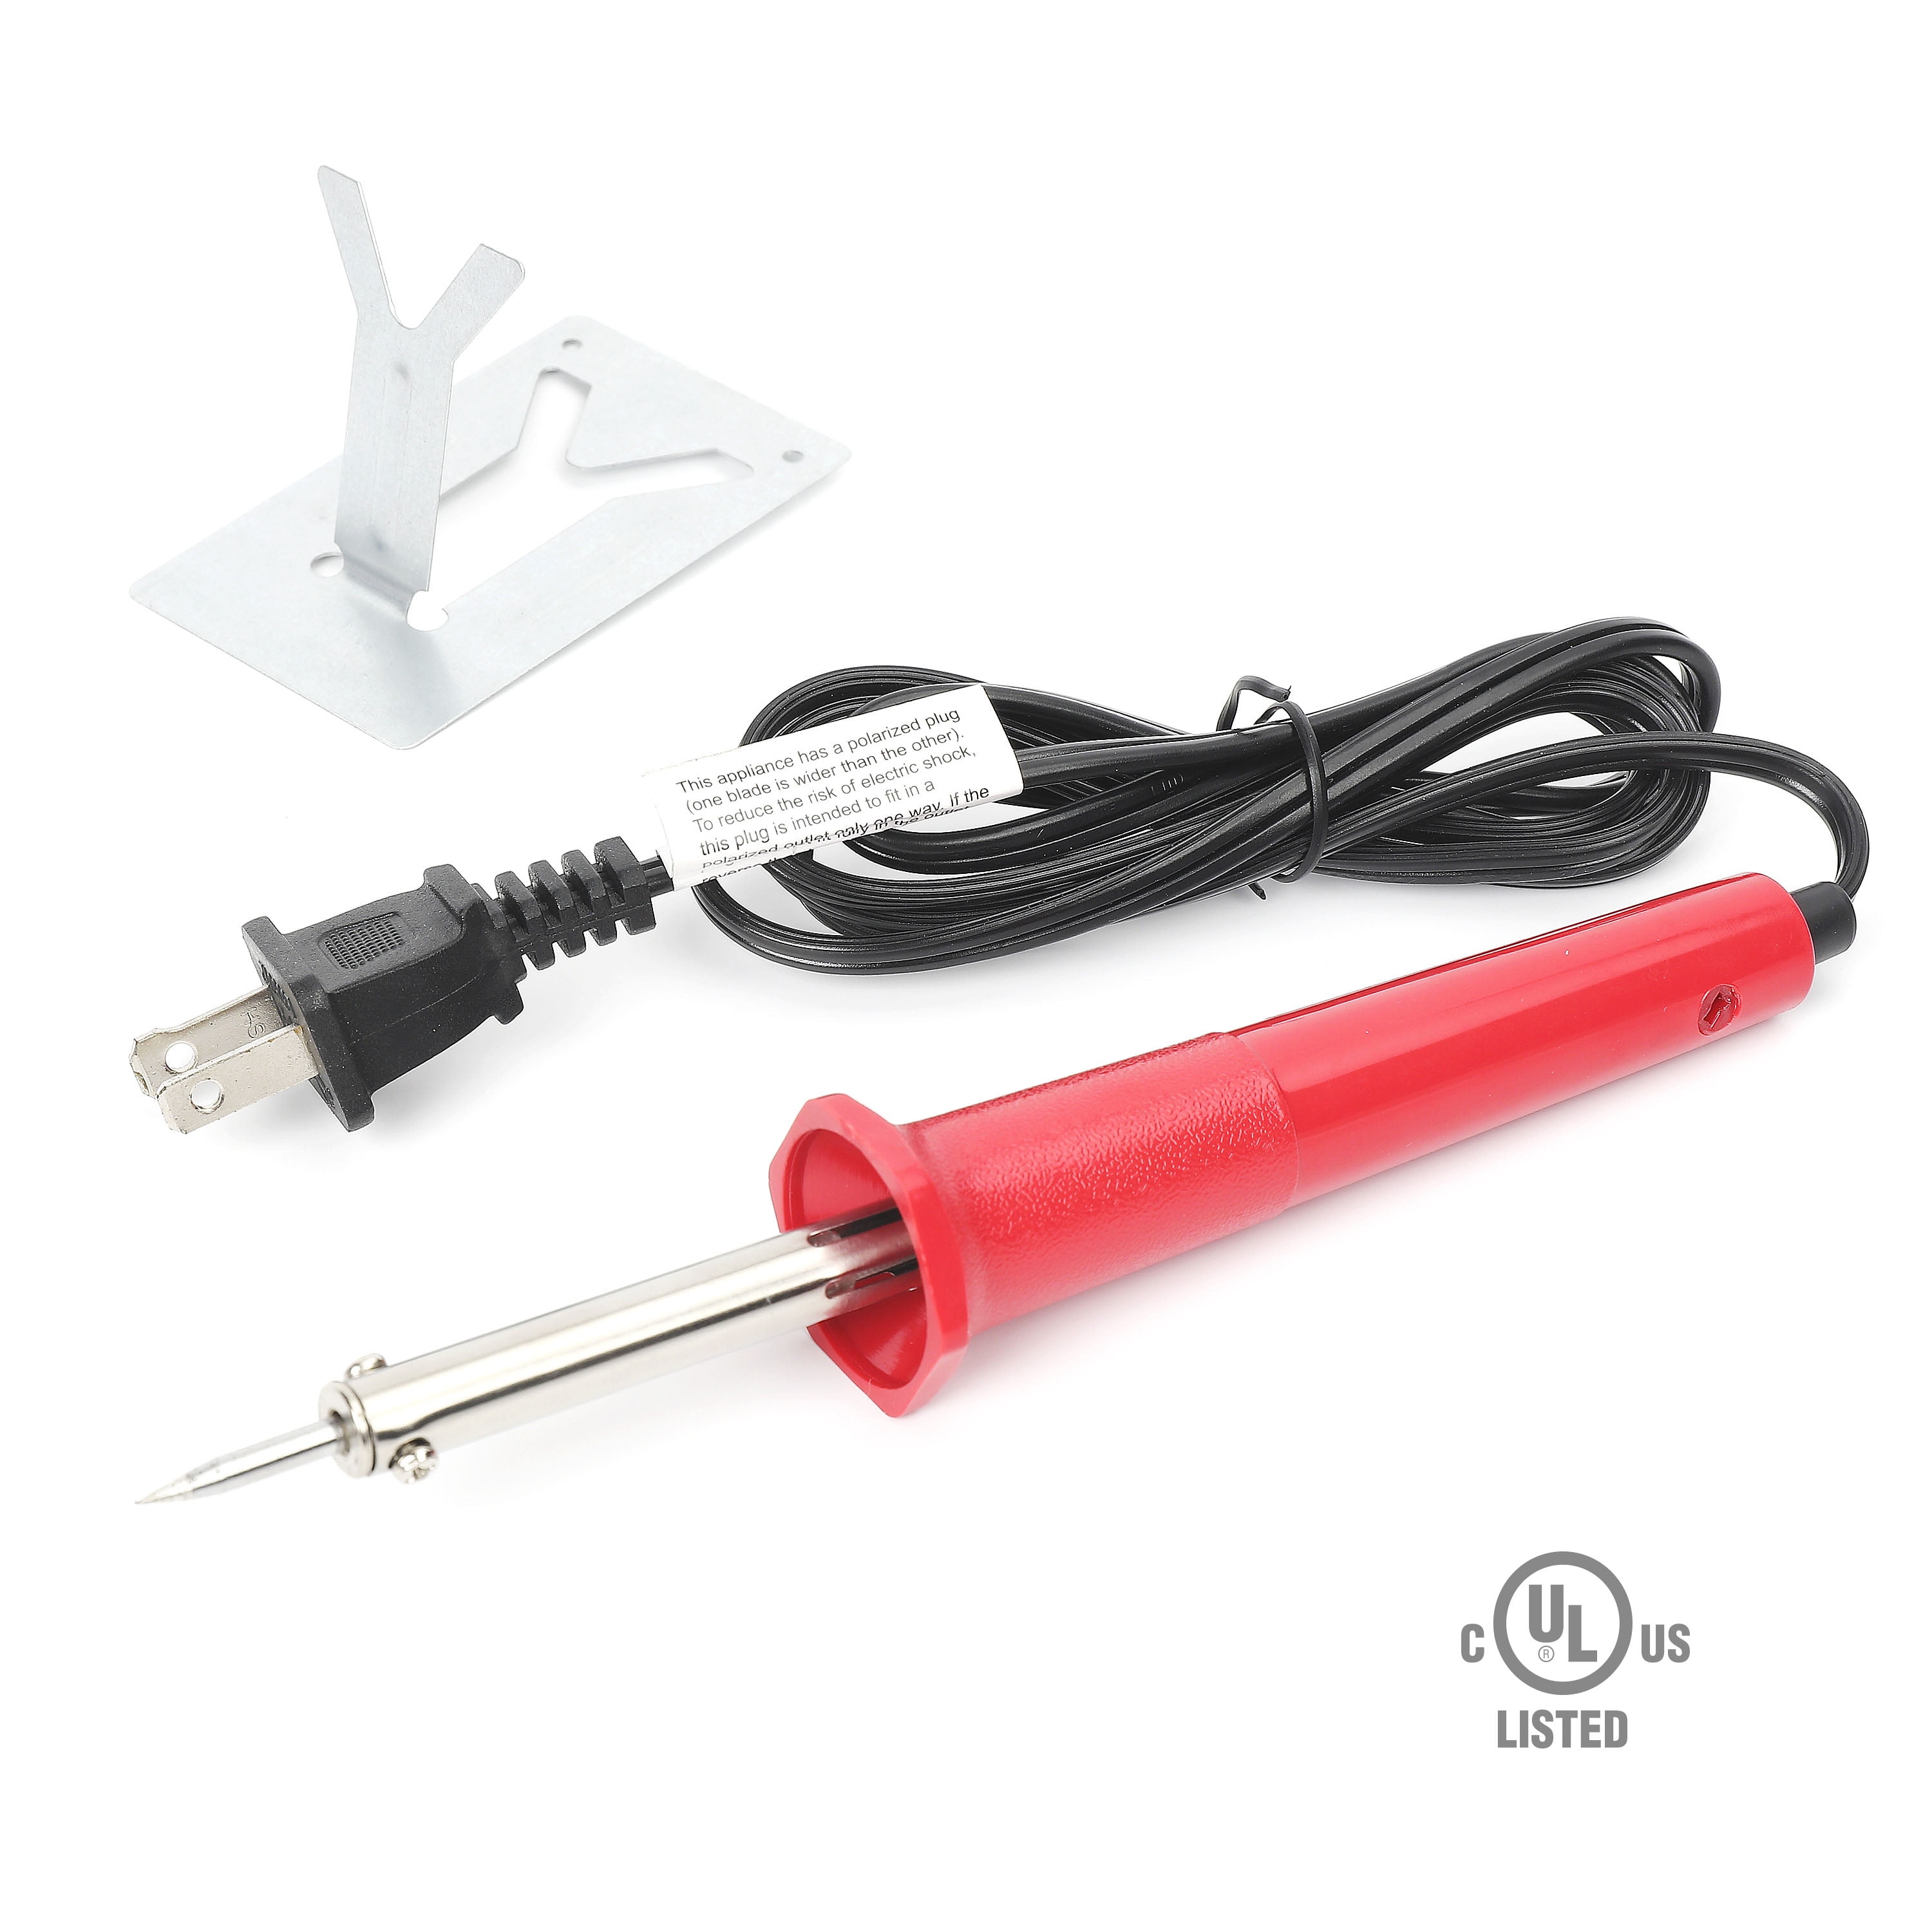 Electric Soldering Iron For Jewelry 